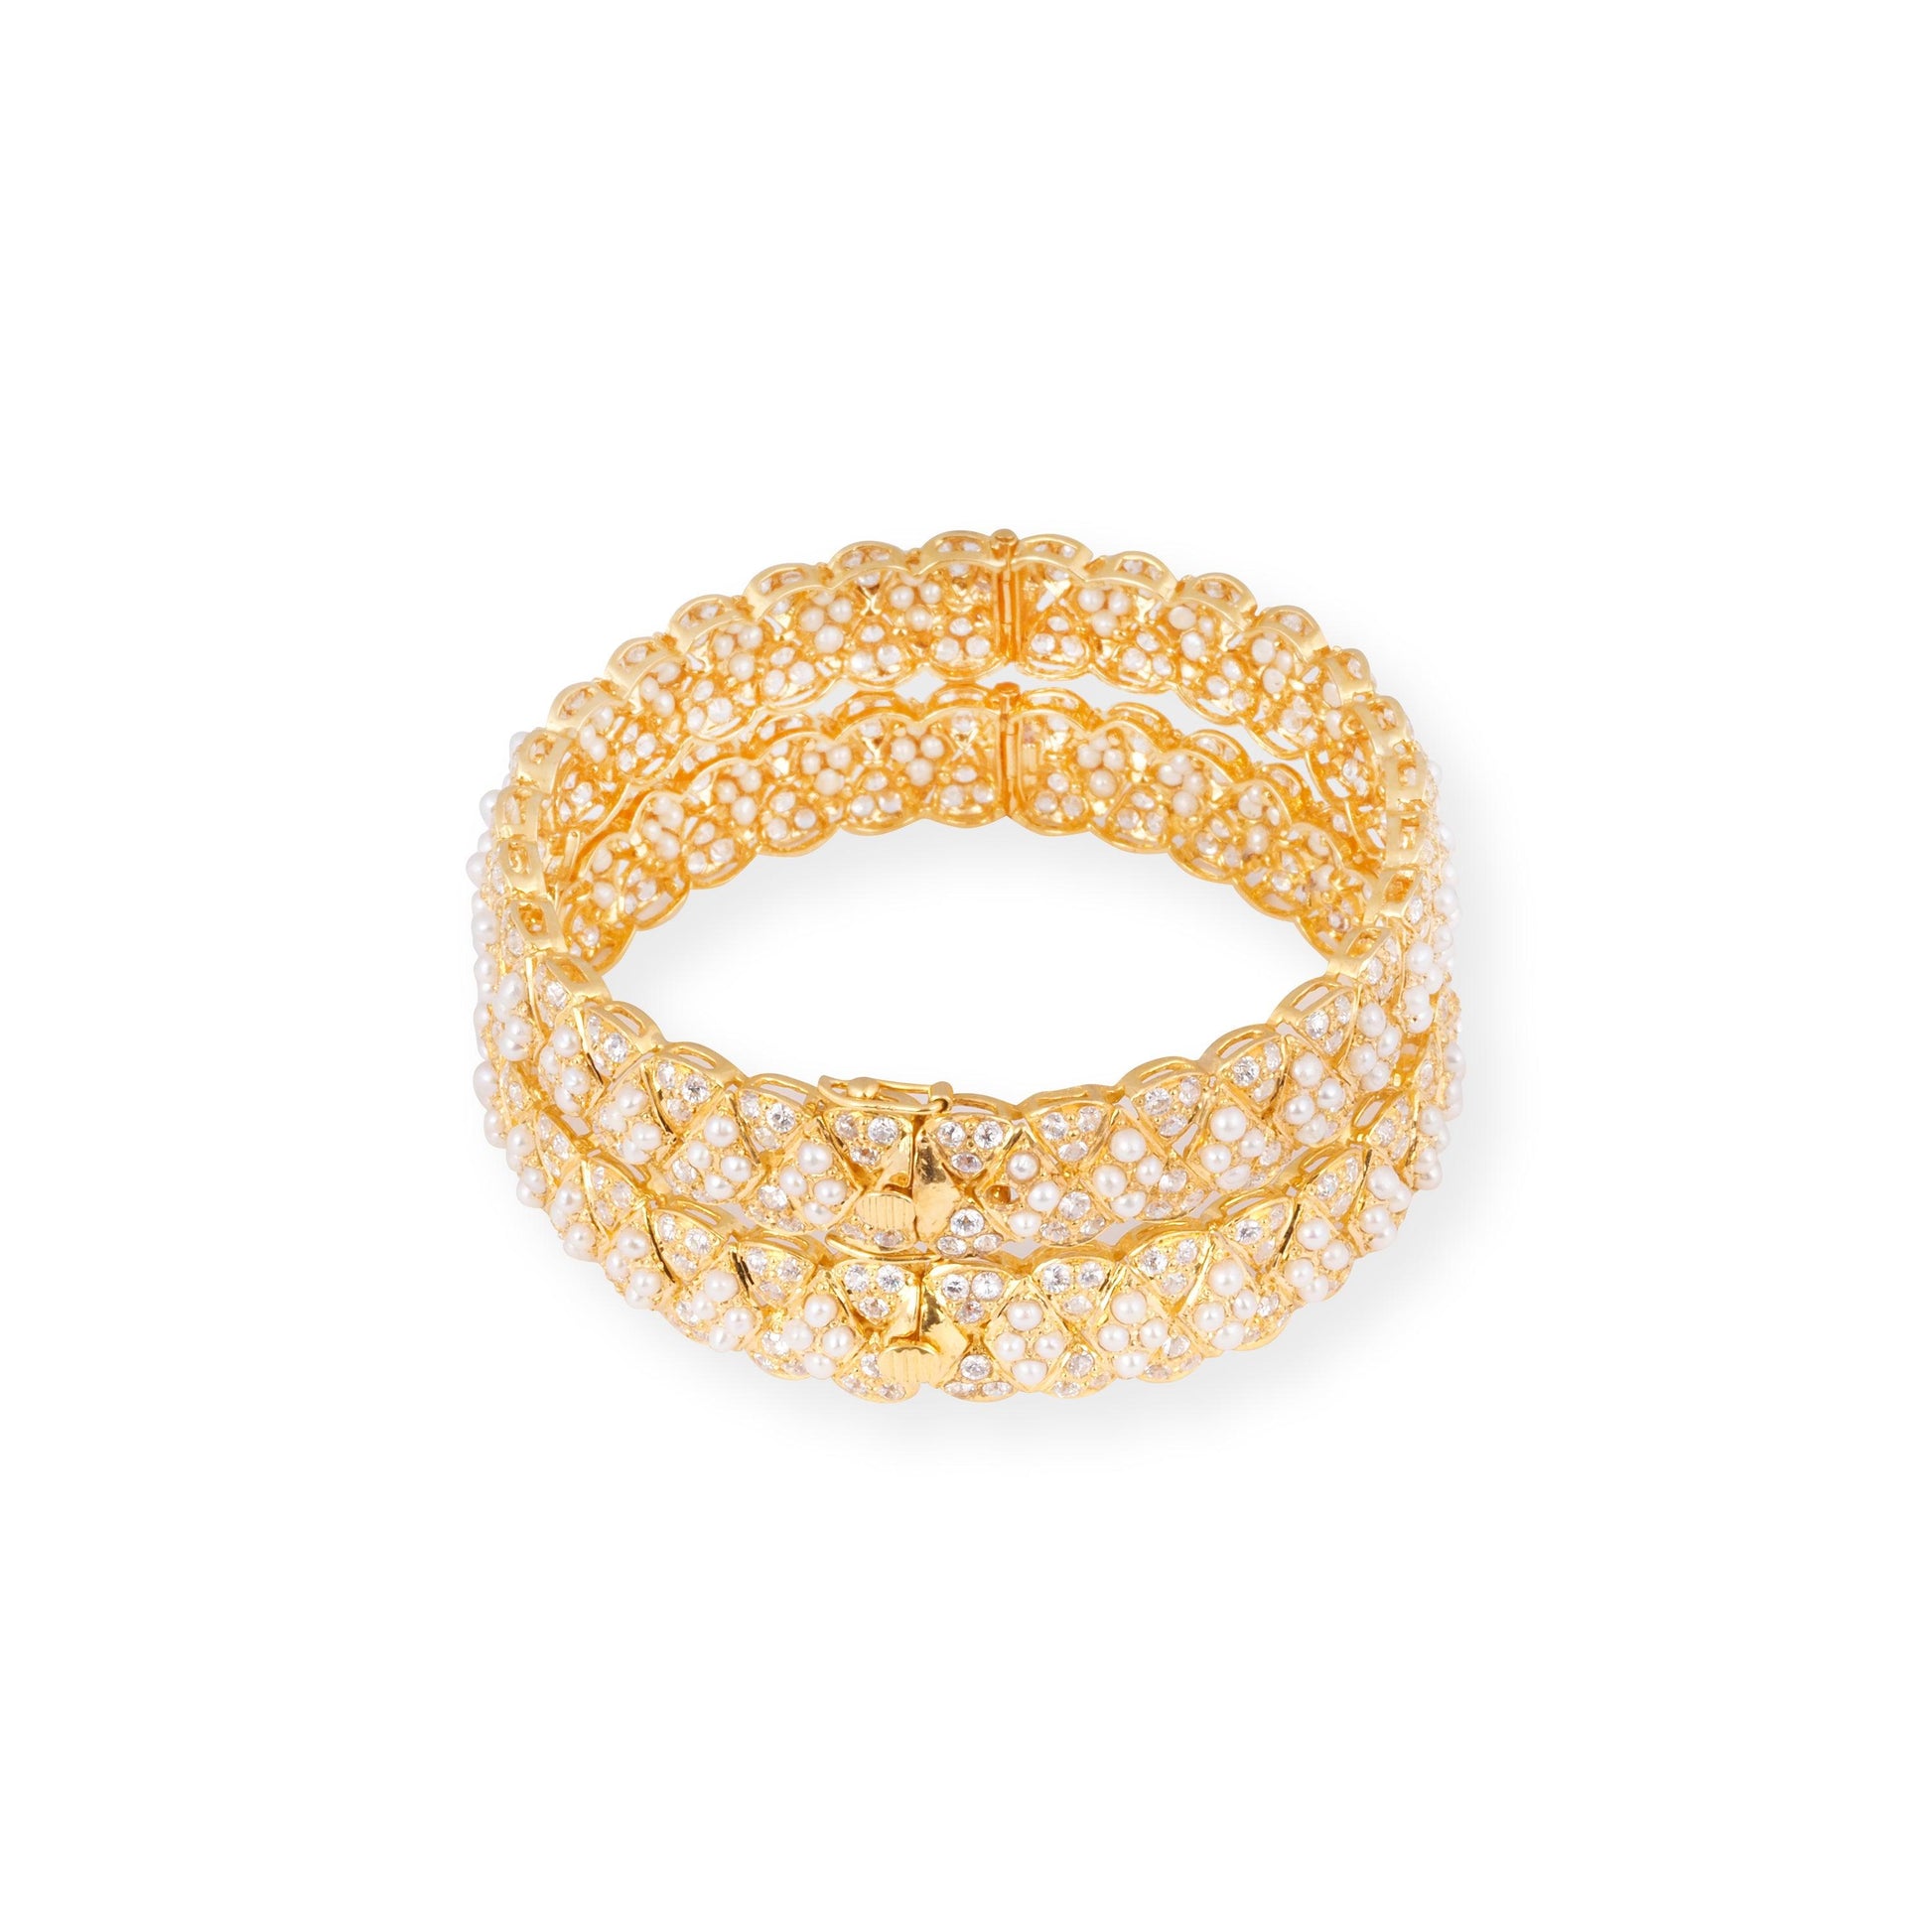 22ct Gold Openable Bangle in Cultured Pearls and Cubic Zirconia Stones with Tongue & Lip Clasp B-8597 - Minar Jewellers